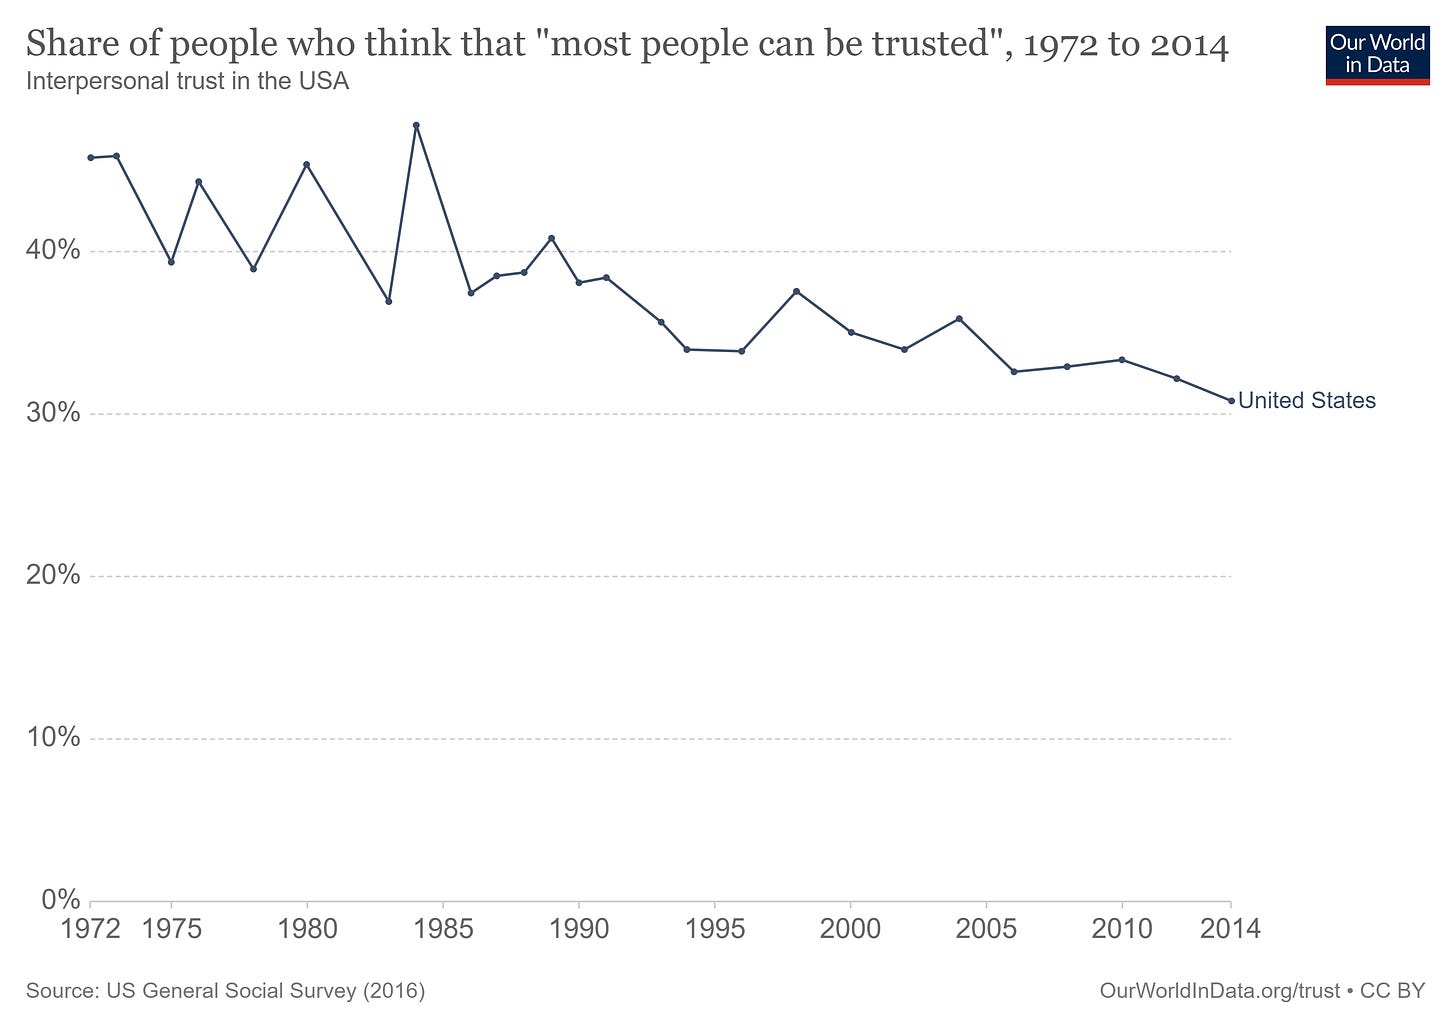 Why don't Americans trust each other anymore?